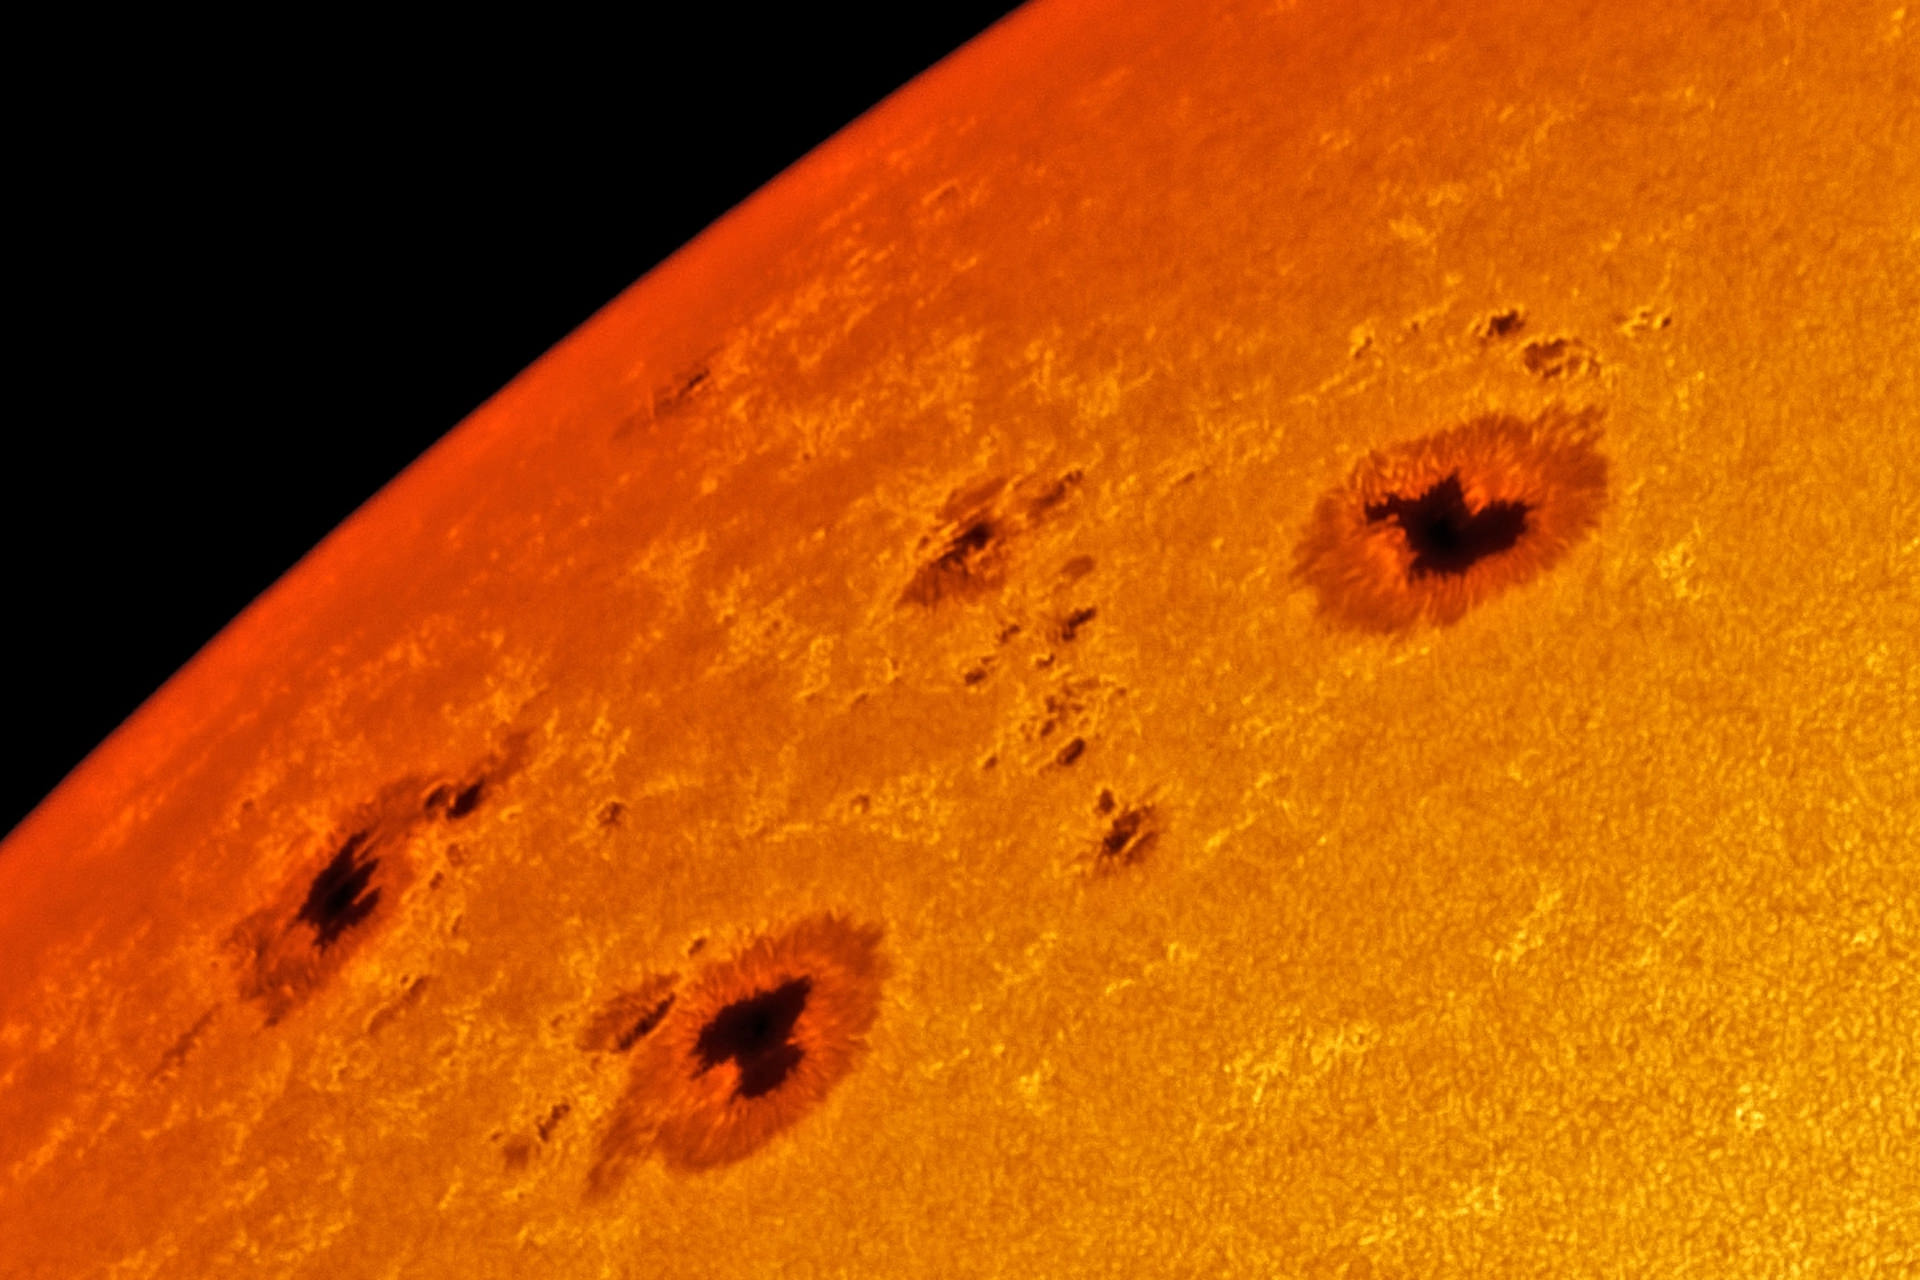 An example of a sunspot on the sun in space